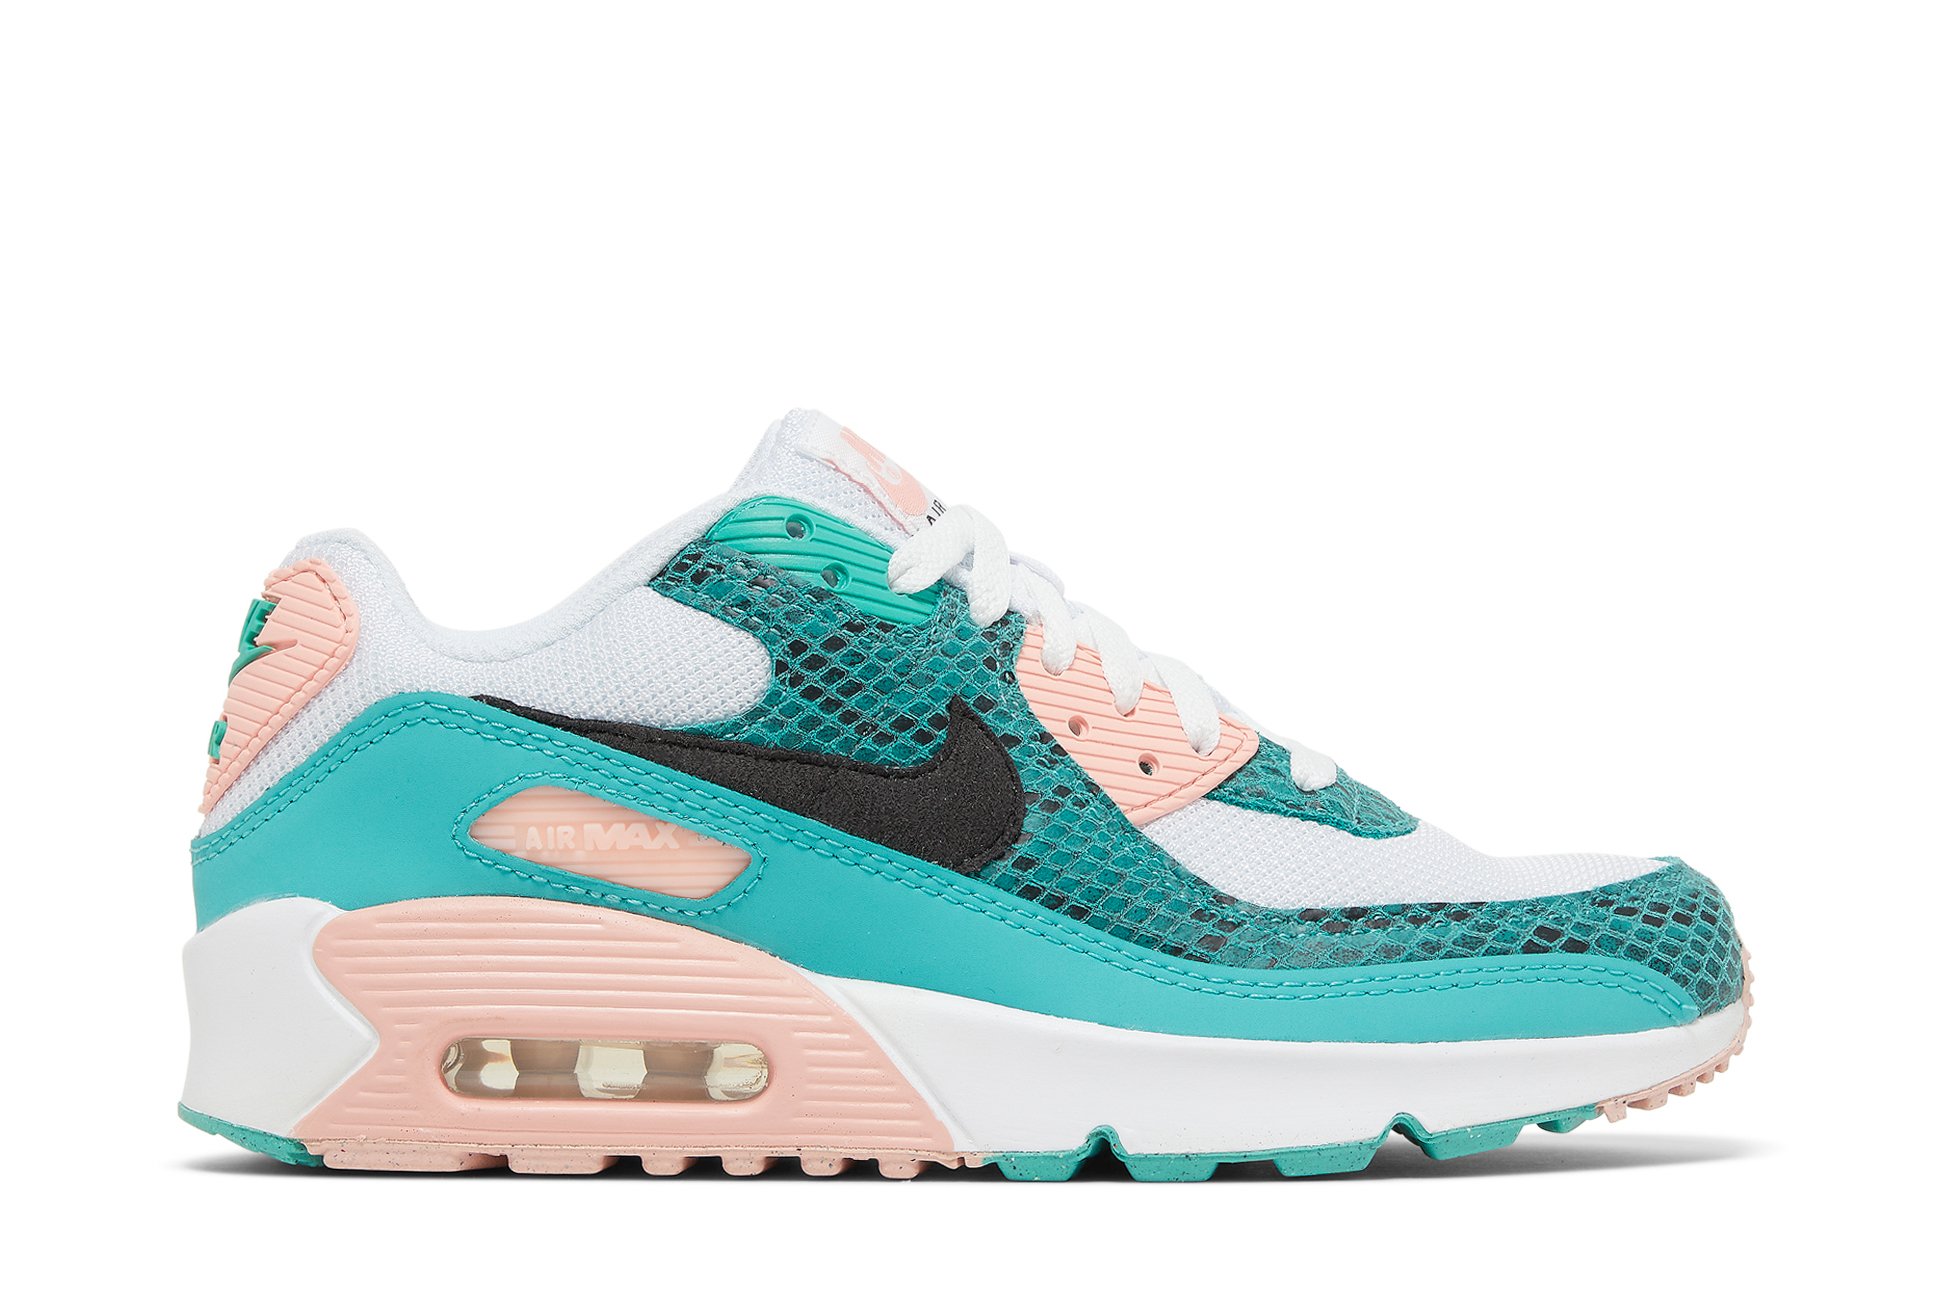 Air Max 90 GS 'Washed Teal Snakeskin'